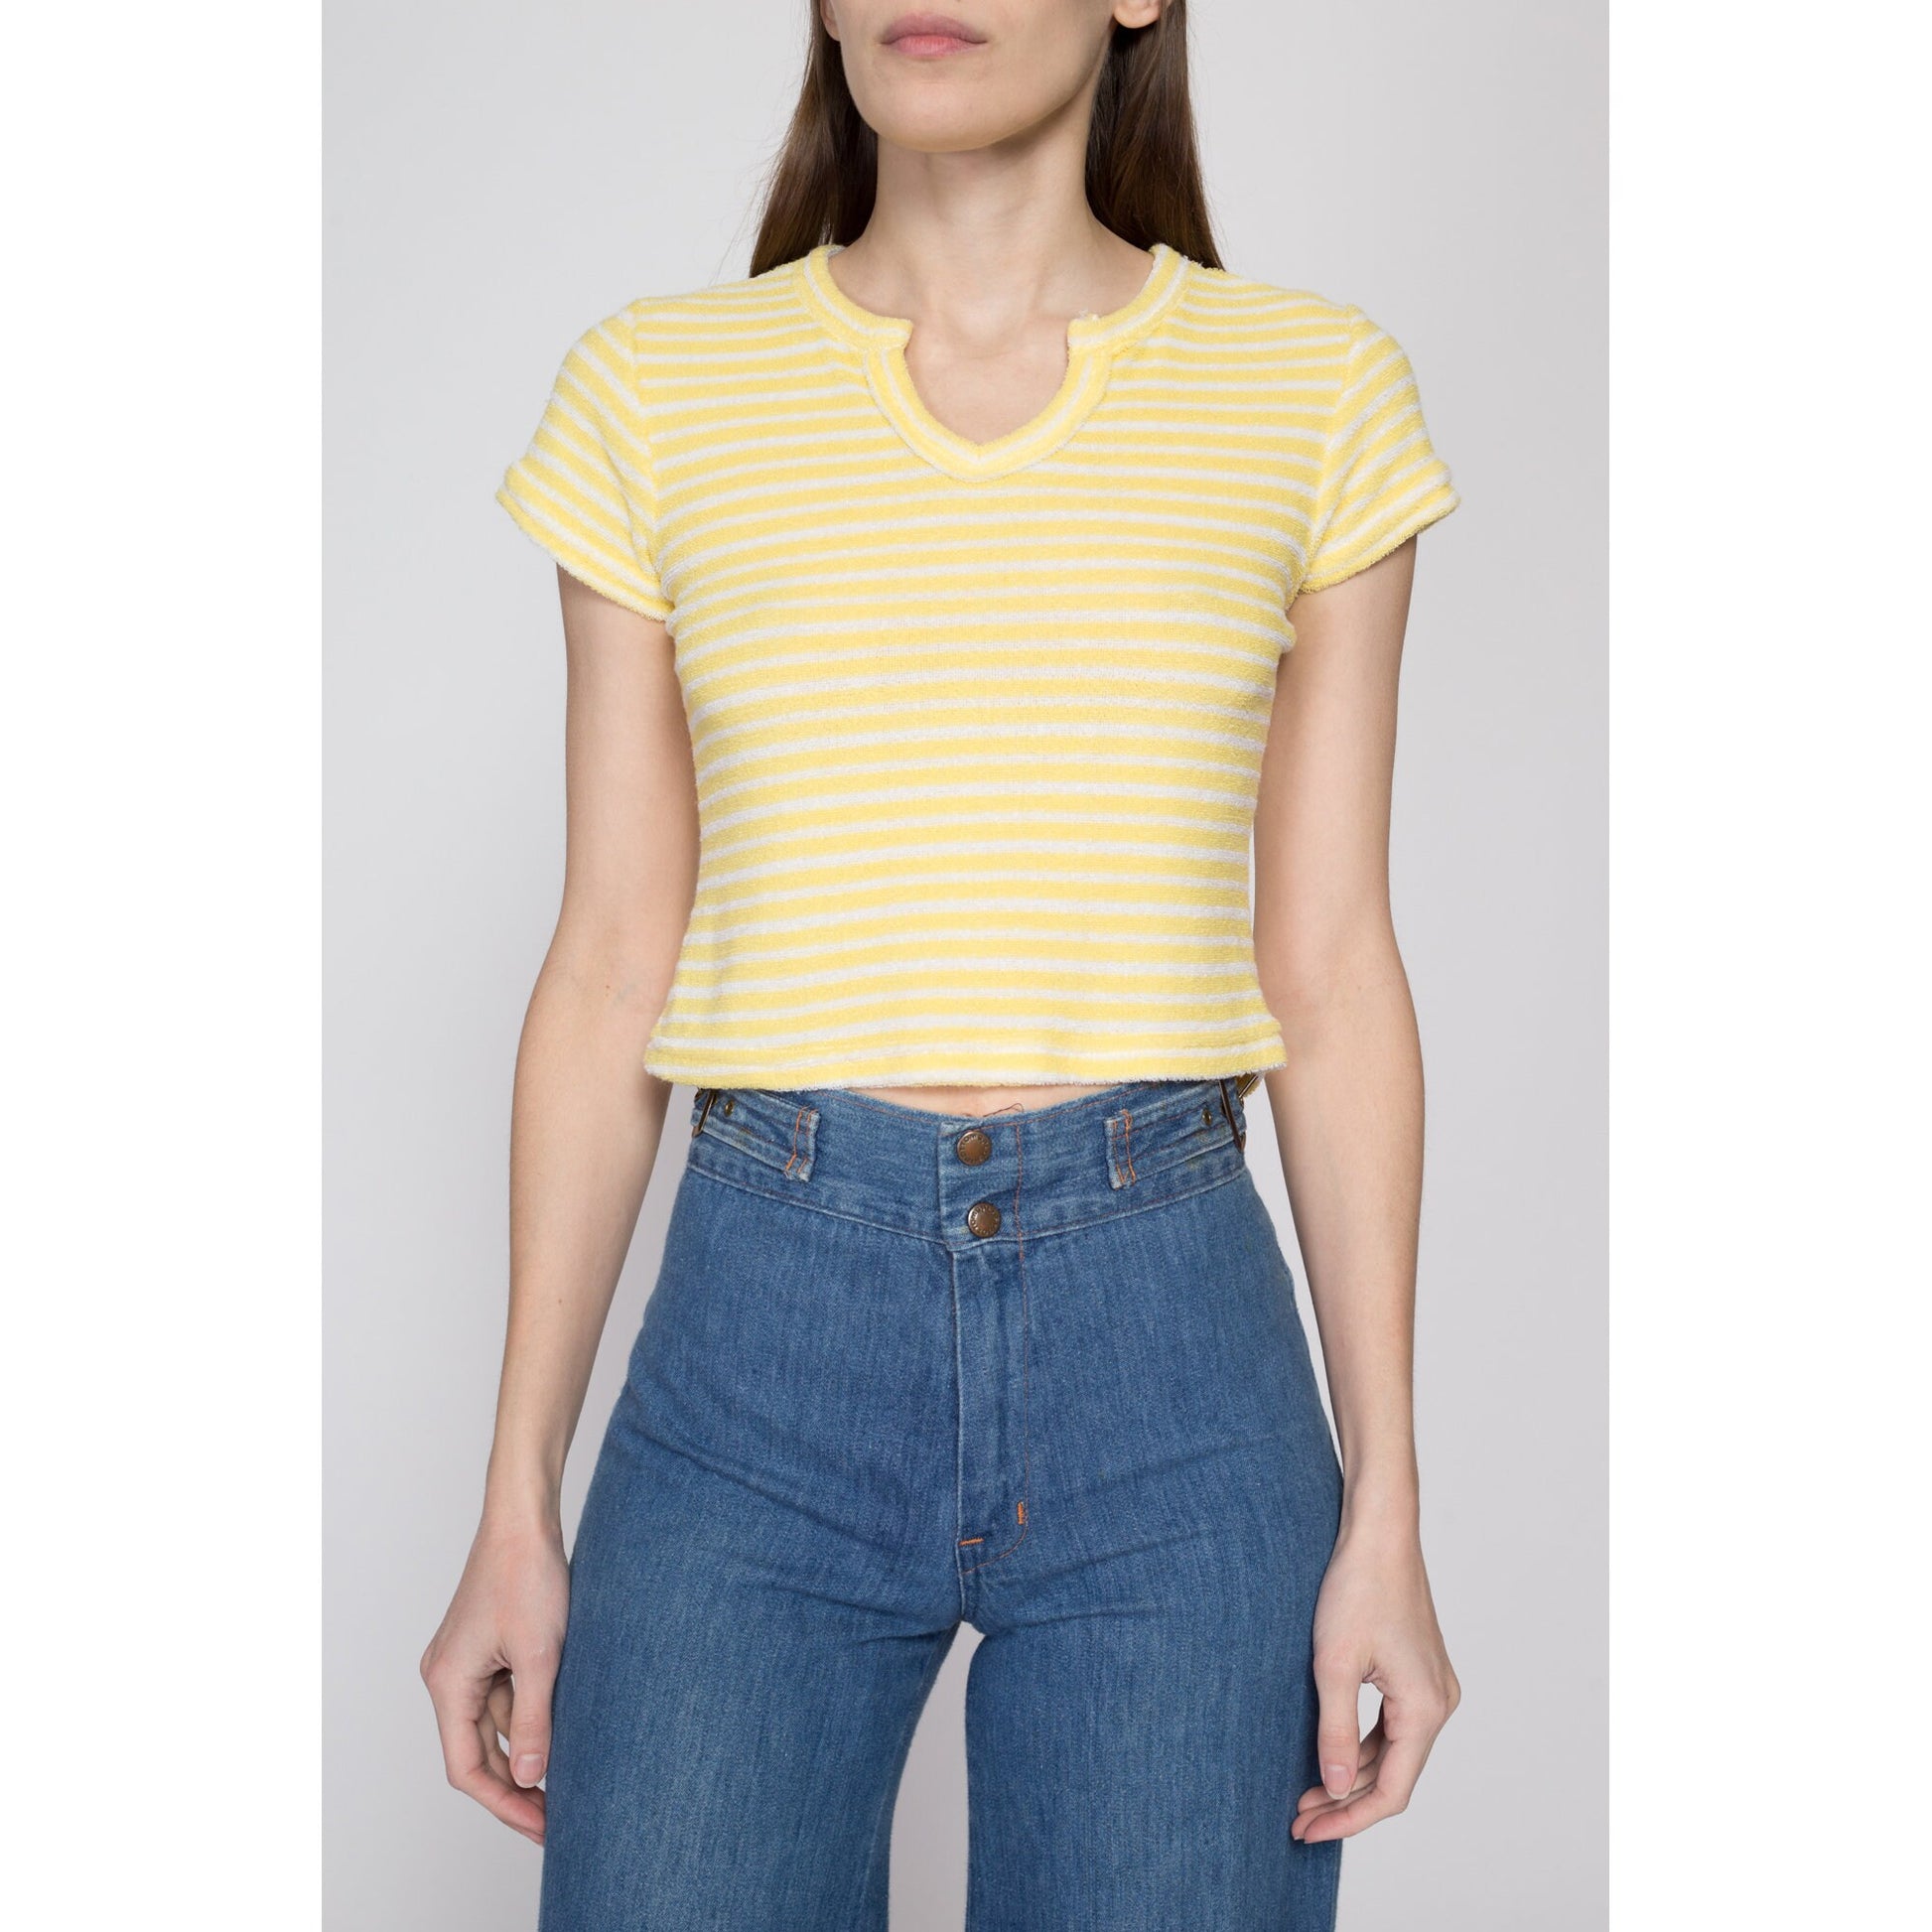 Small 80s Yellow & White Striped Terrycloth Crop Top | Retro Vintage Short Sleeve Cropped Shirt